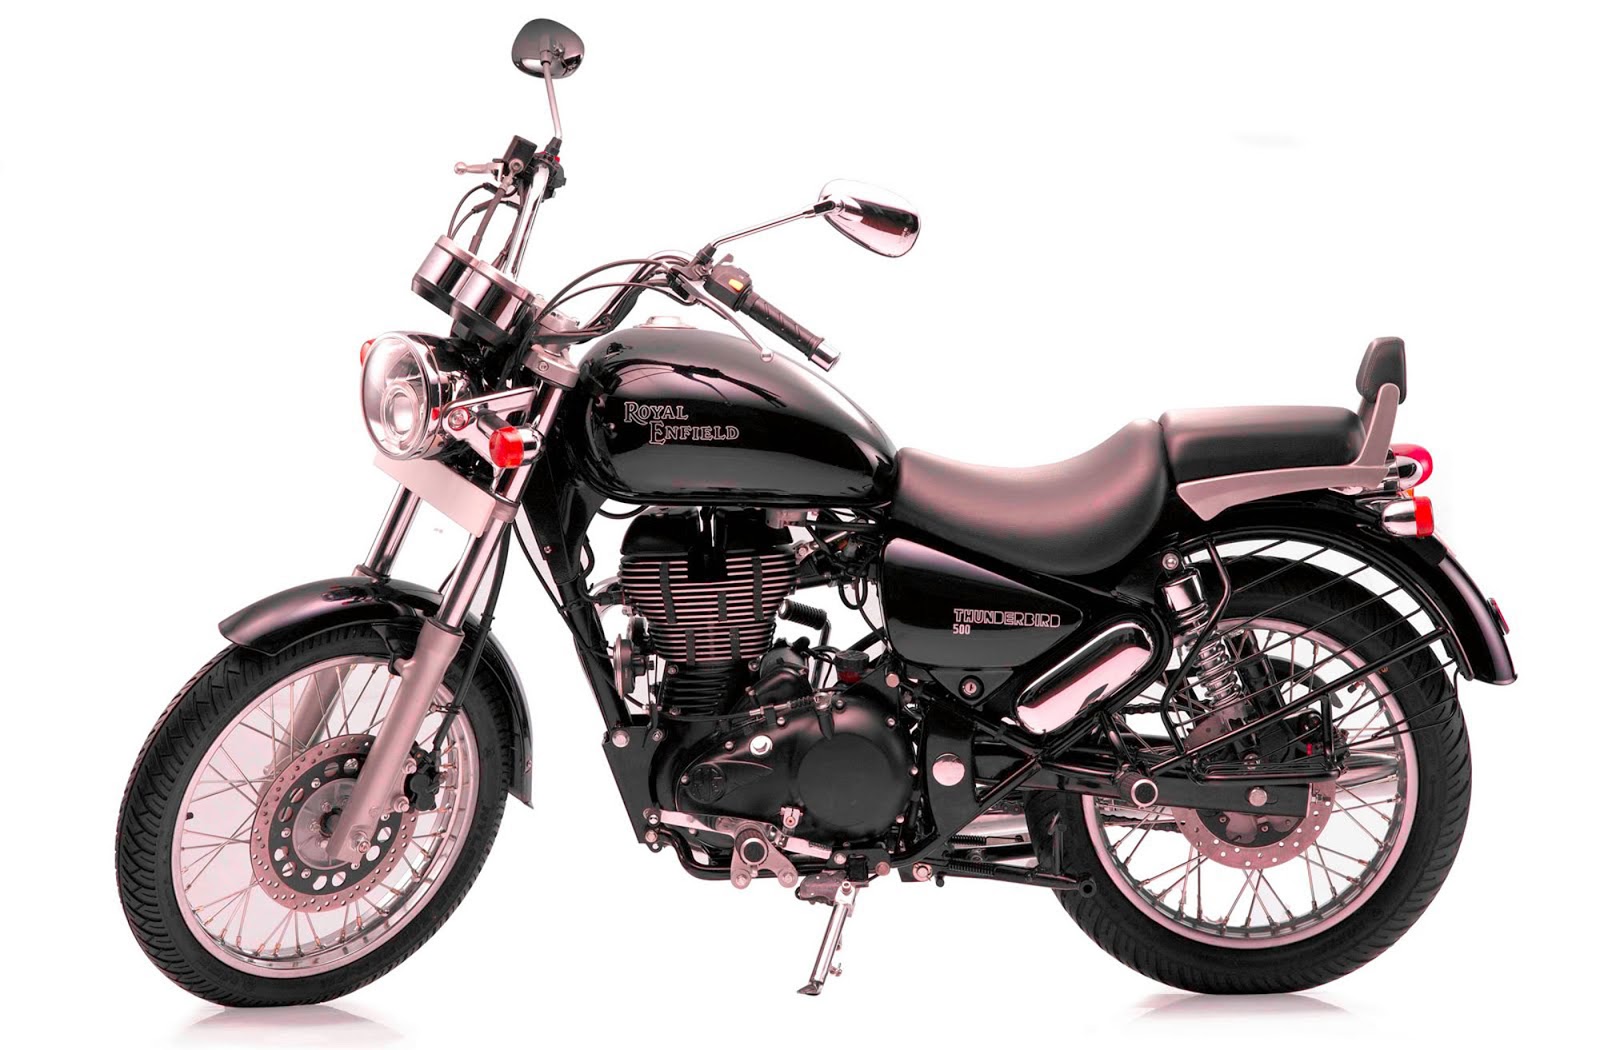 Royal Enfield Bullet Motorcycle Pictures